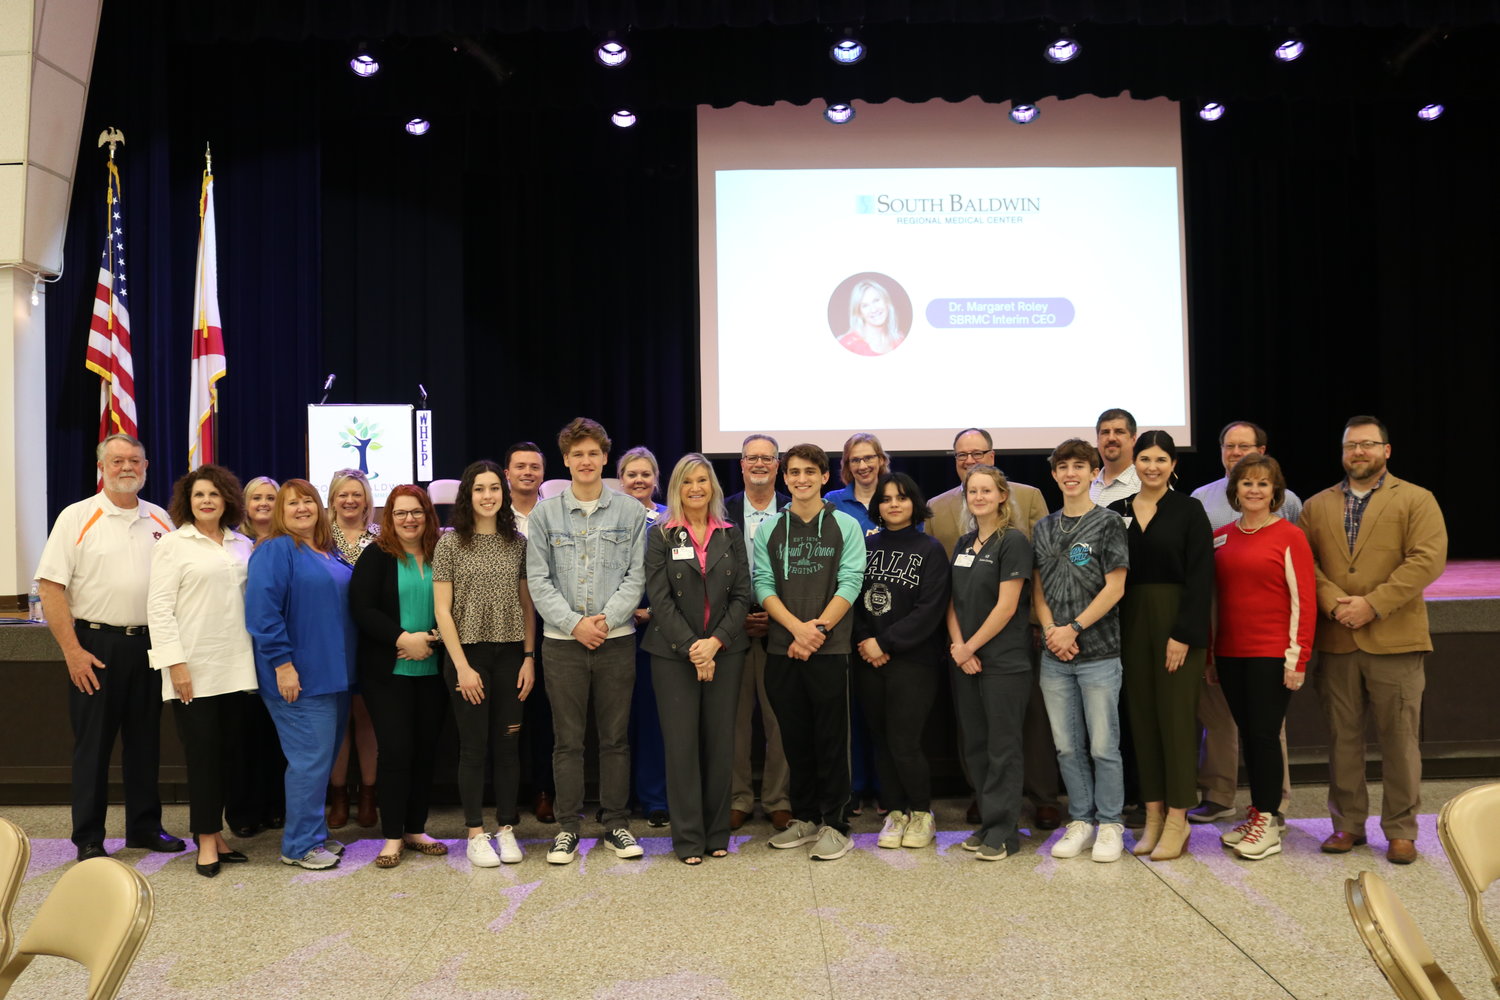 The South Baldwin Chamber’s first 2022 Leadership Series featured South Baldwin Regional Interim CEO Margaret Roley as speaker. In attendance were hospital staff, city officials, hospital board members, chamber board members and students from Foley High School.